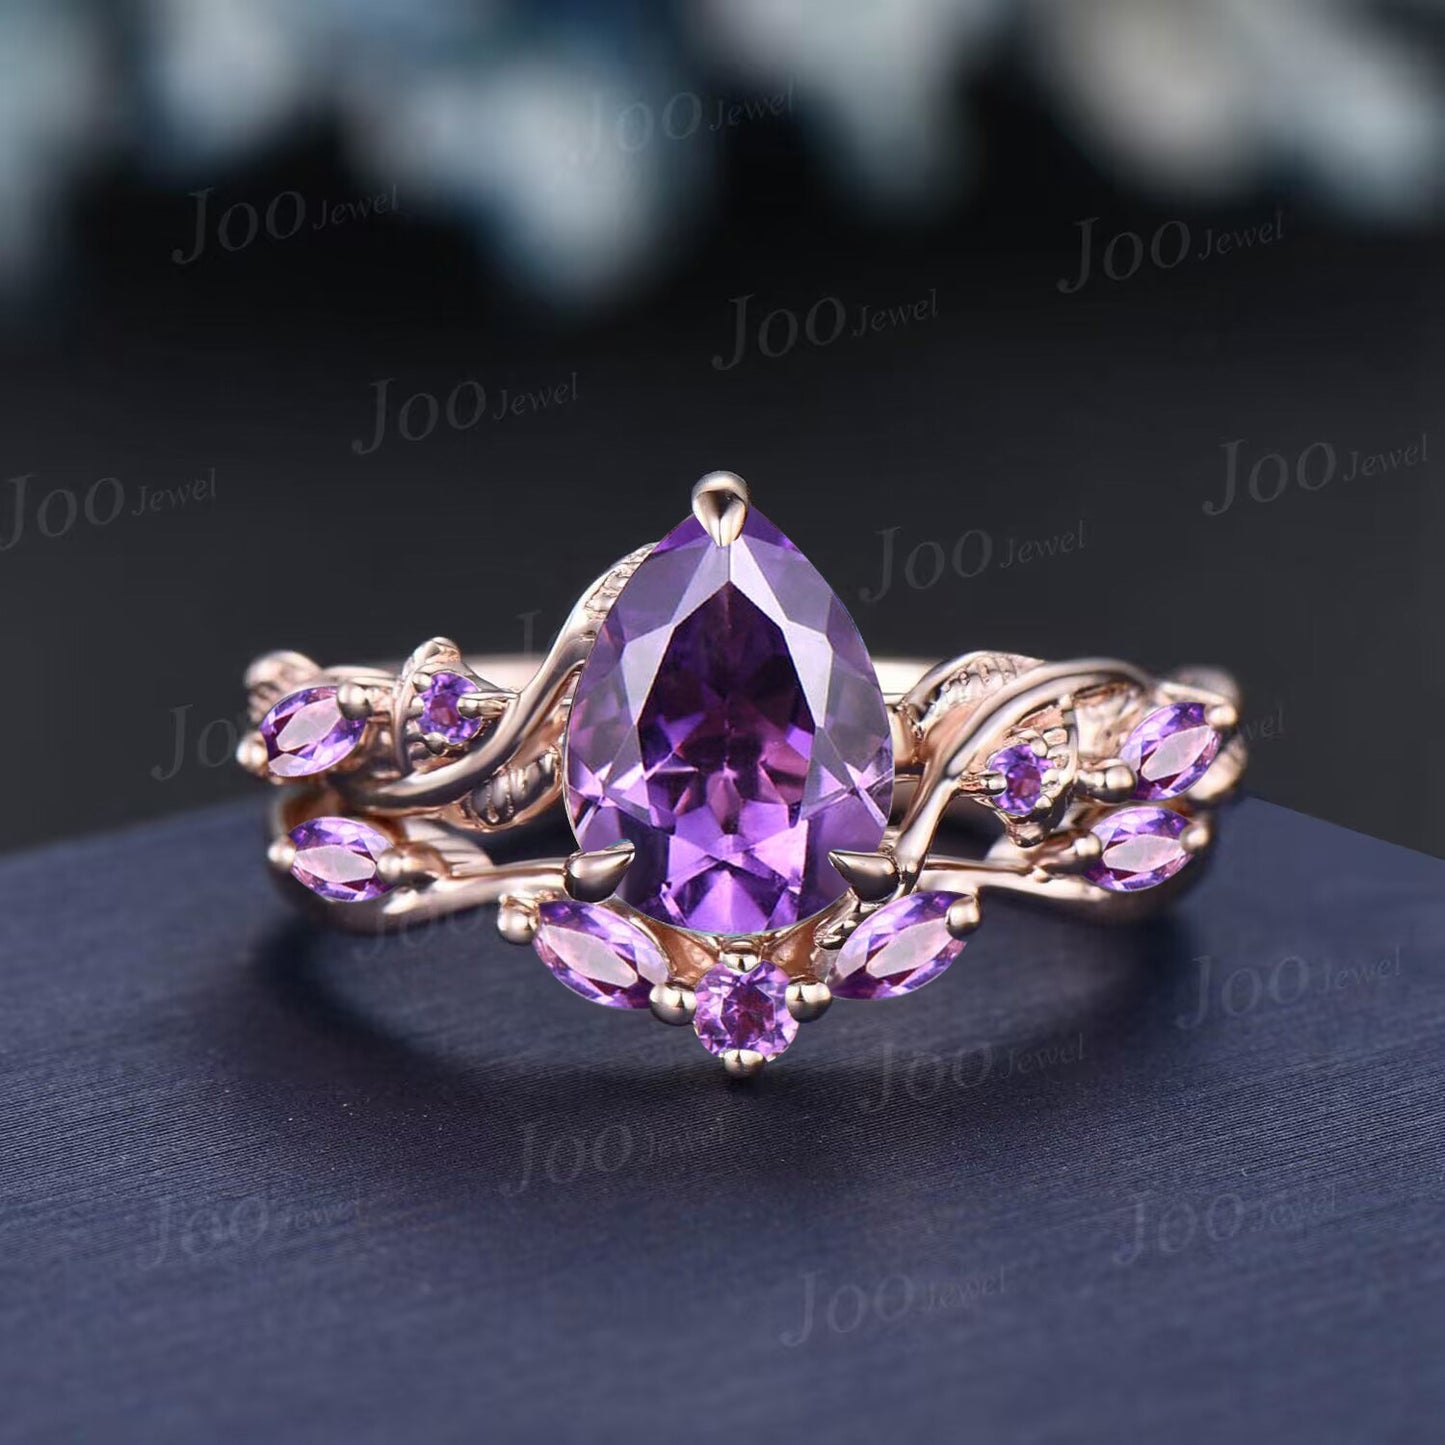 Nature Inspired Natural Amethyst Engagement Ring Set 1.25ct Twist Twig Vine Pear Wedding Ring Unique Proposal Ring February Birthstone Gifts